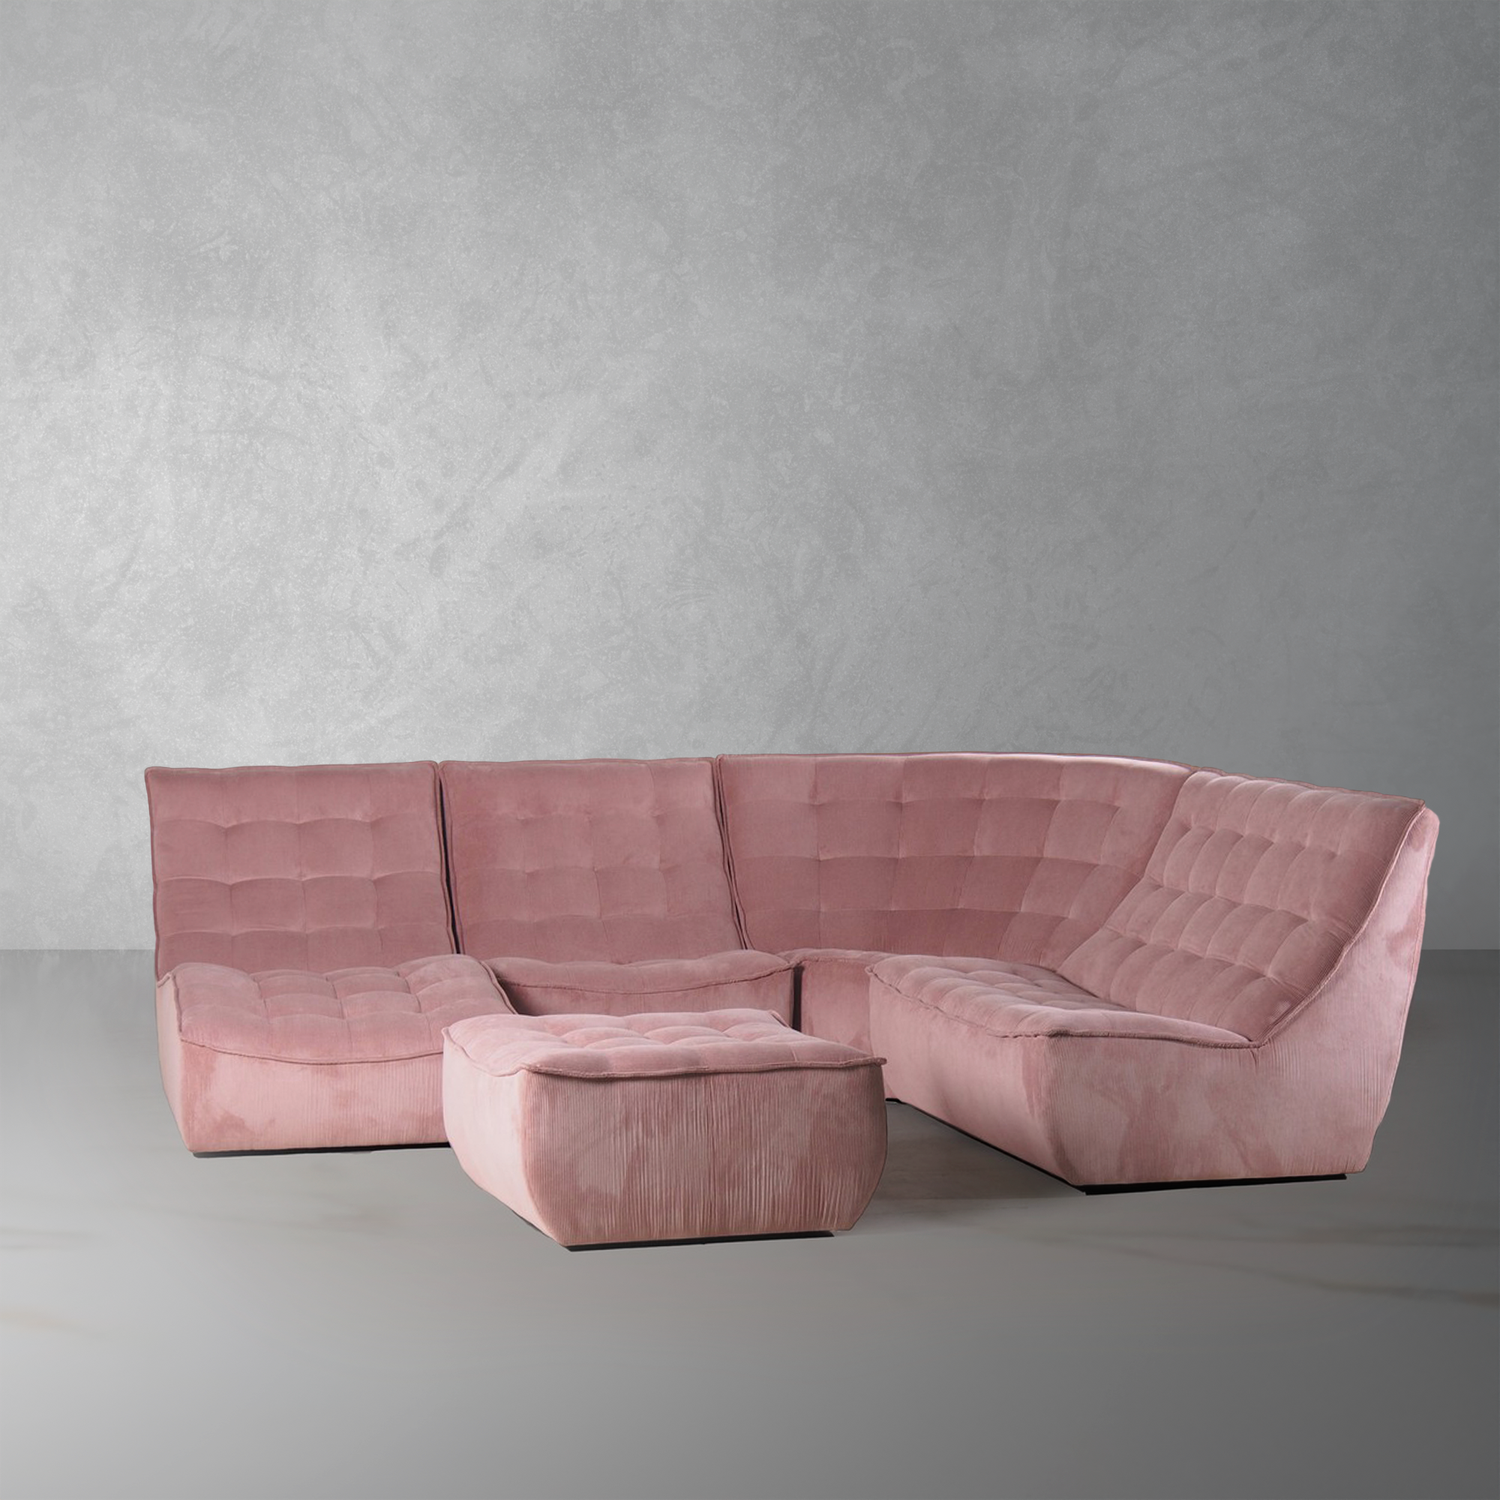 Morales Modular Sectional-France & Son-F218171PINK-F218172PINK-F218170PINK-F218175PINK-F218174PINK-SectionalsBlush-5pc Set-1-France and Son